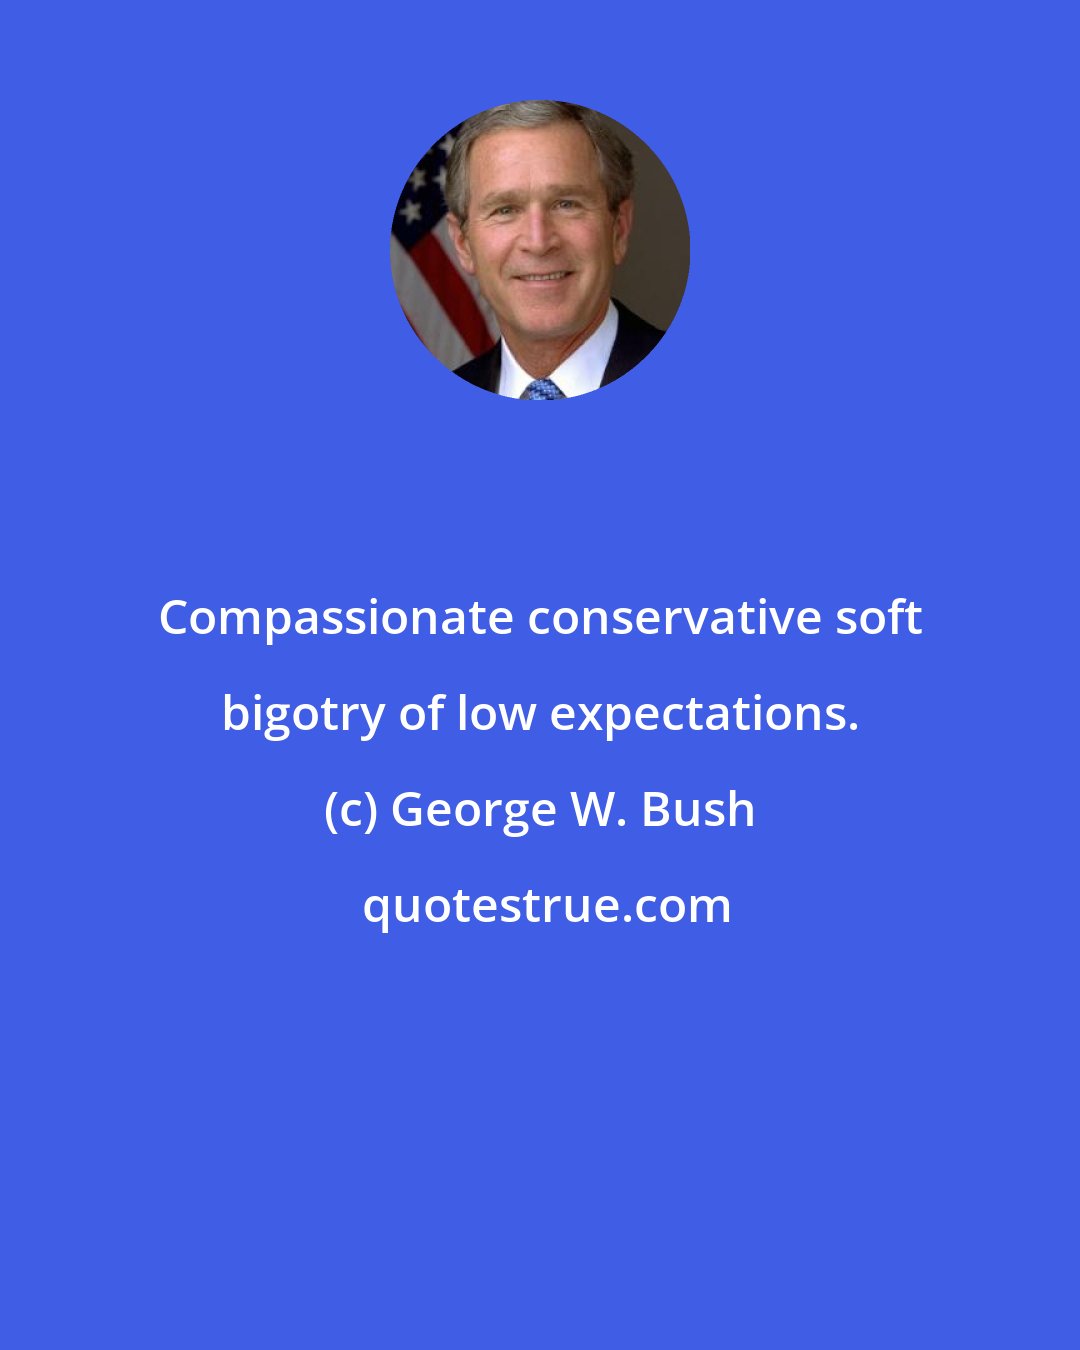 George W. Bush: Compassionate conservative soft bigotry of low expectations.